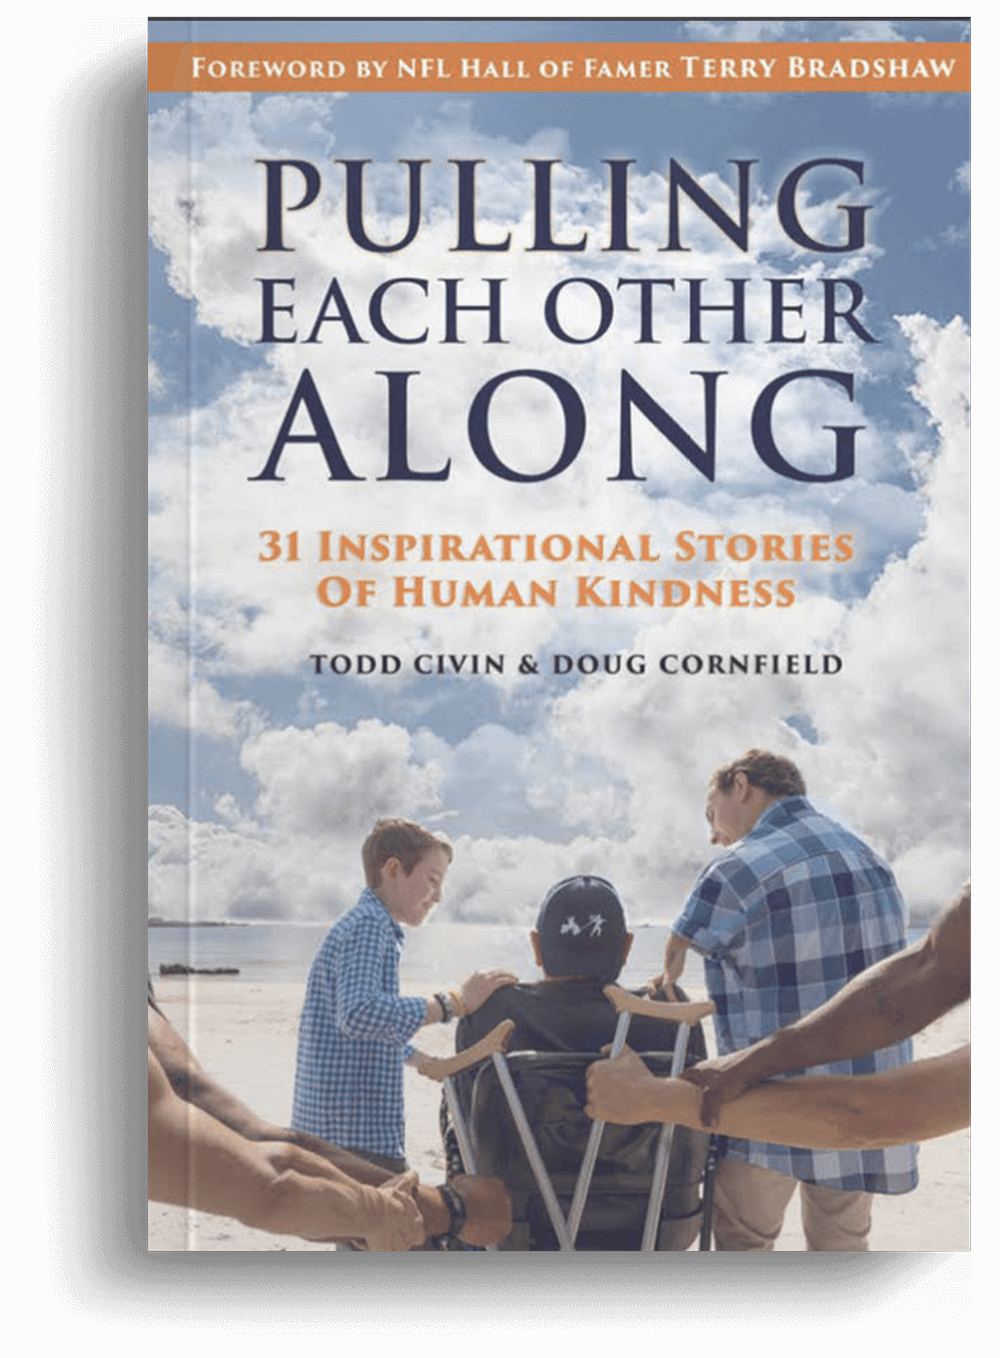 Pulling Each Other Along,stories of human kindness